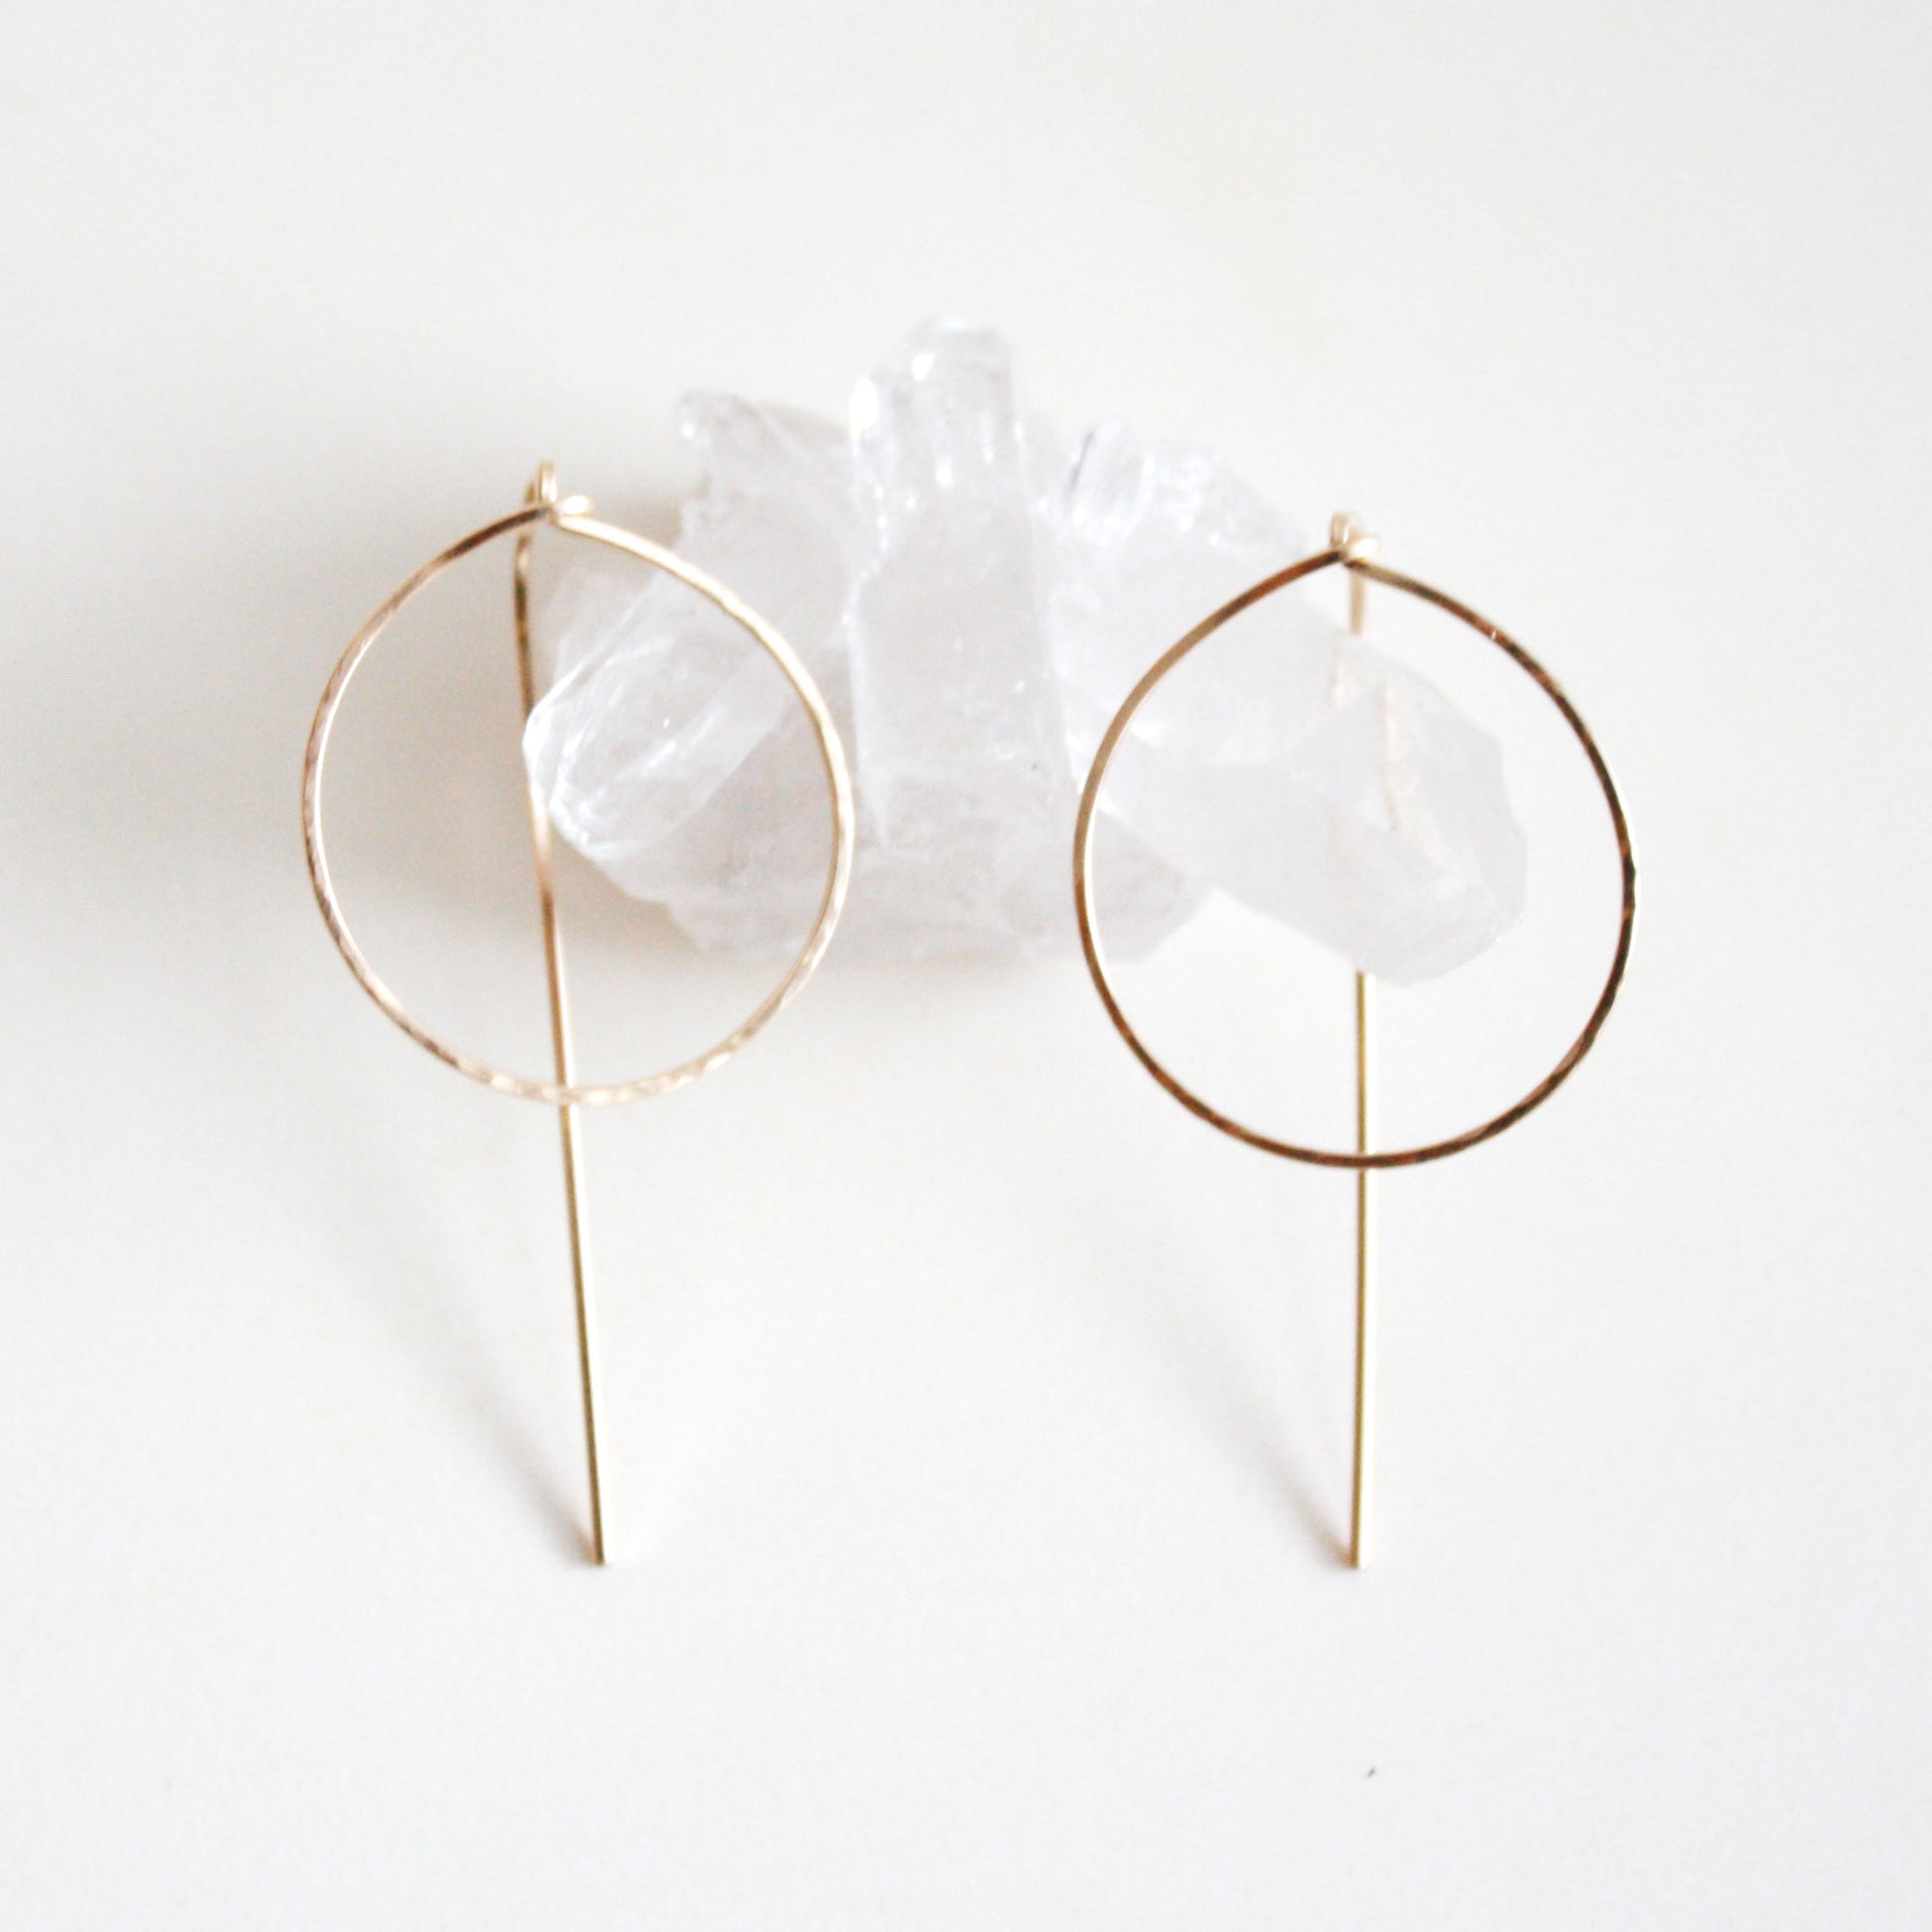 Large Circle Threader Earrings | 14K Gold Filled or Sterling Silver Sterling Silver